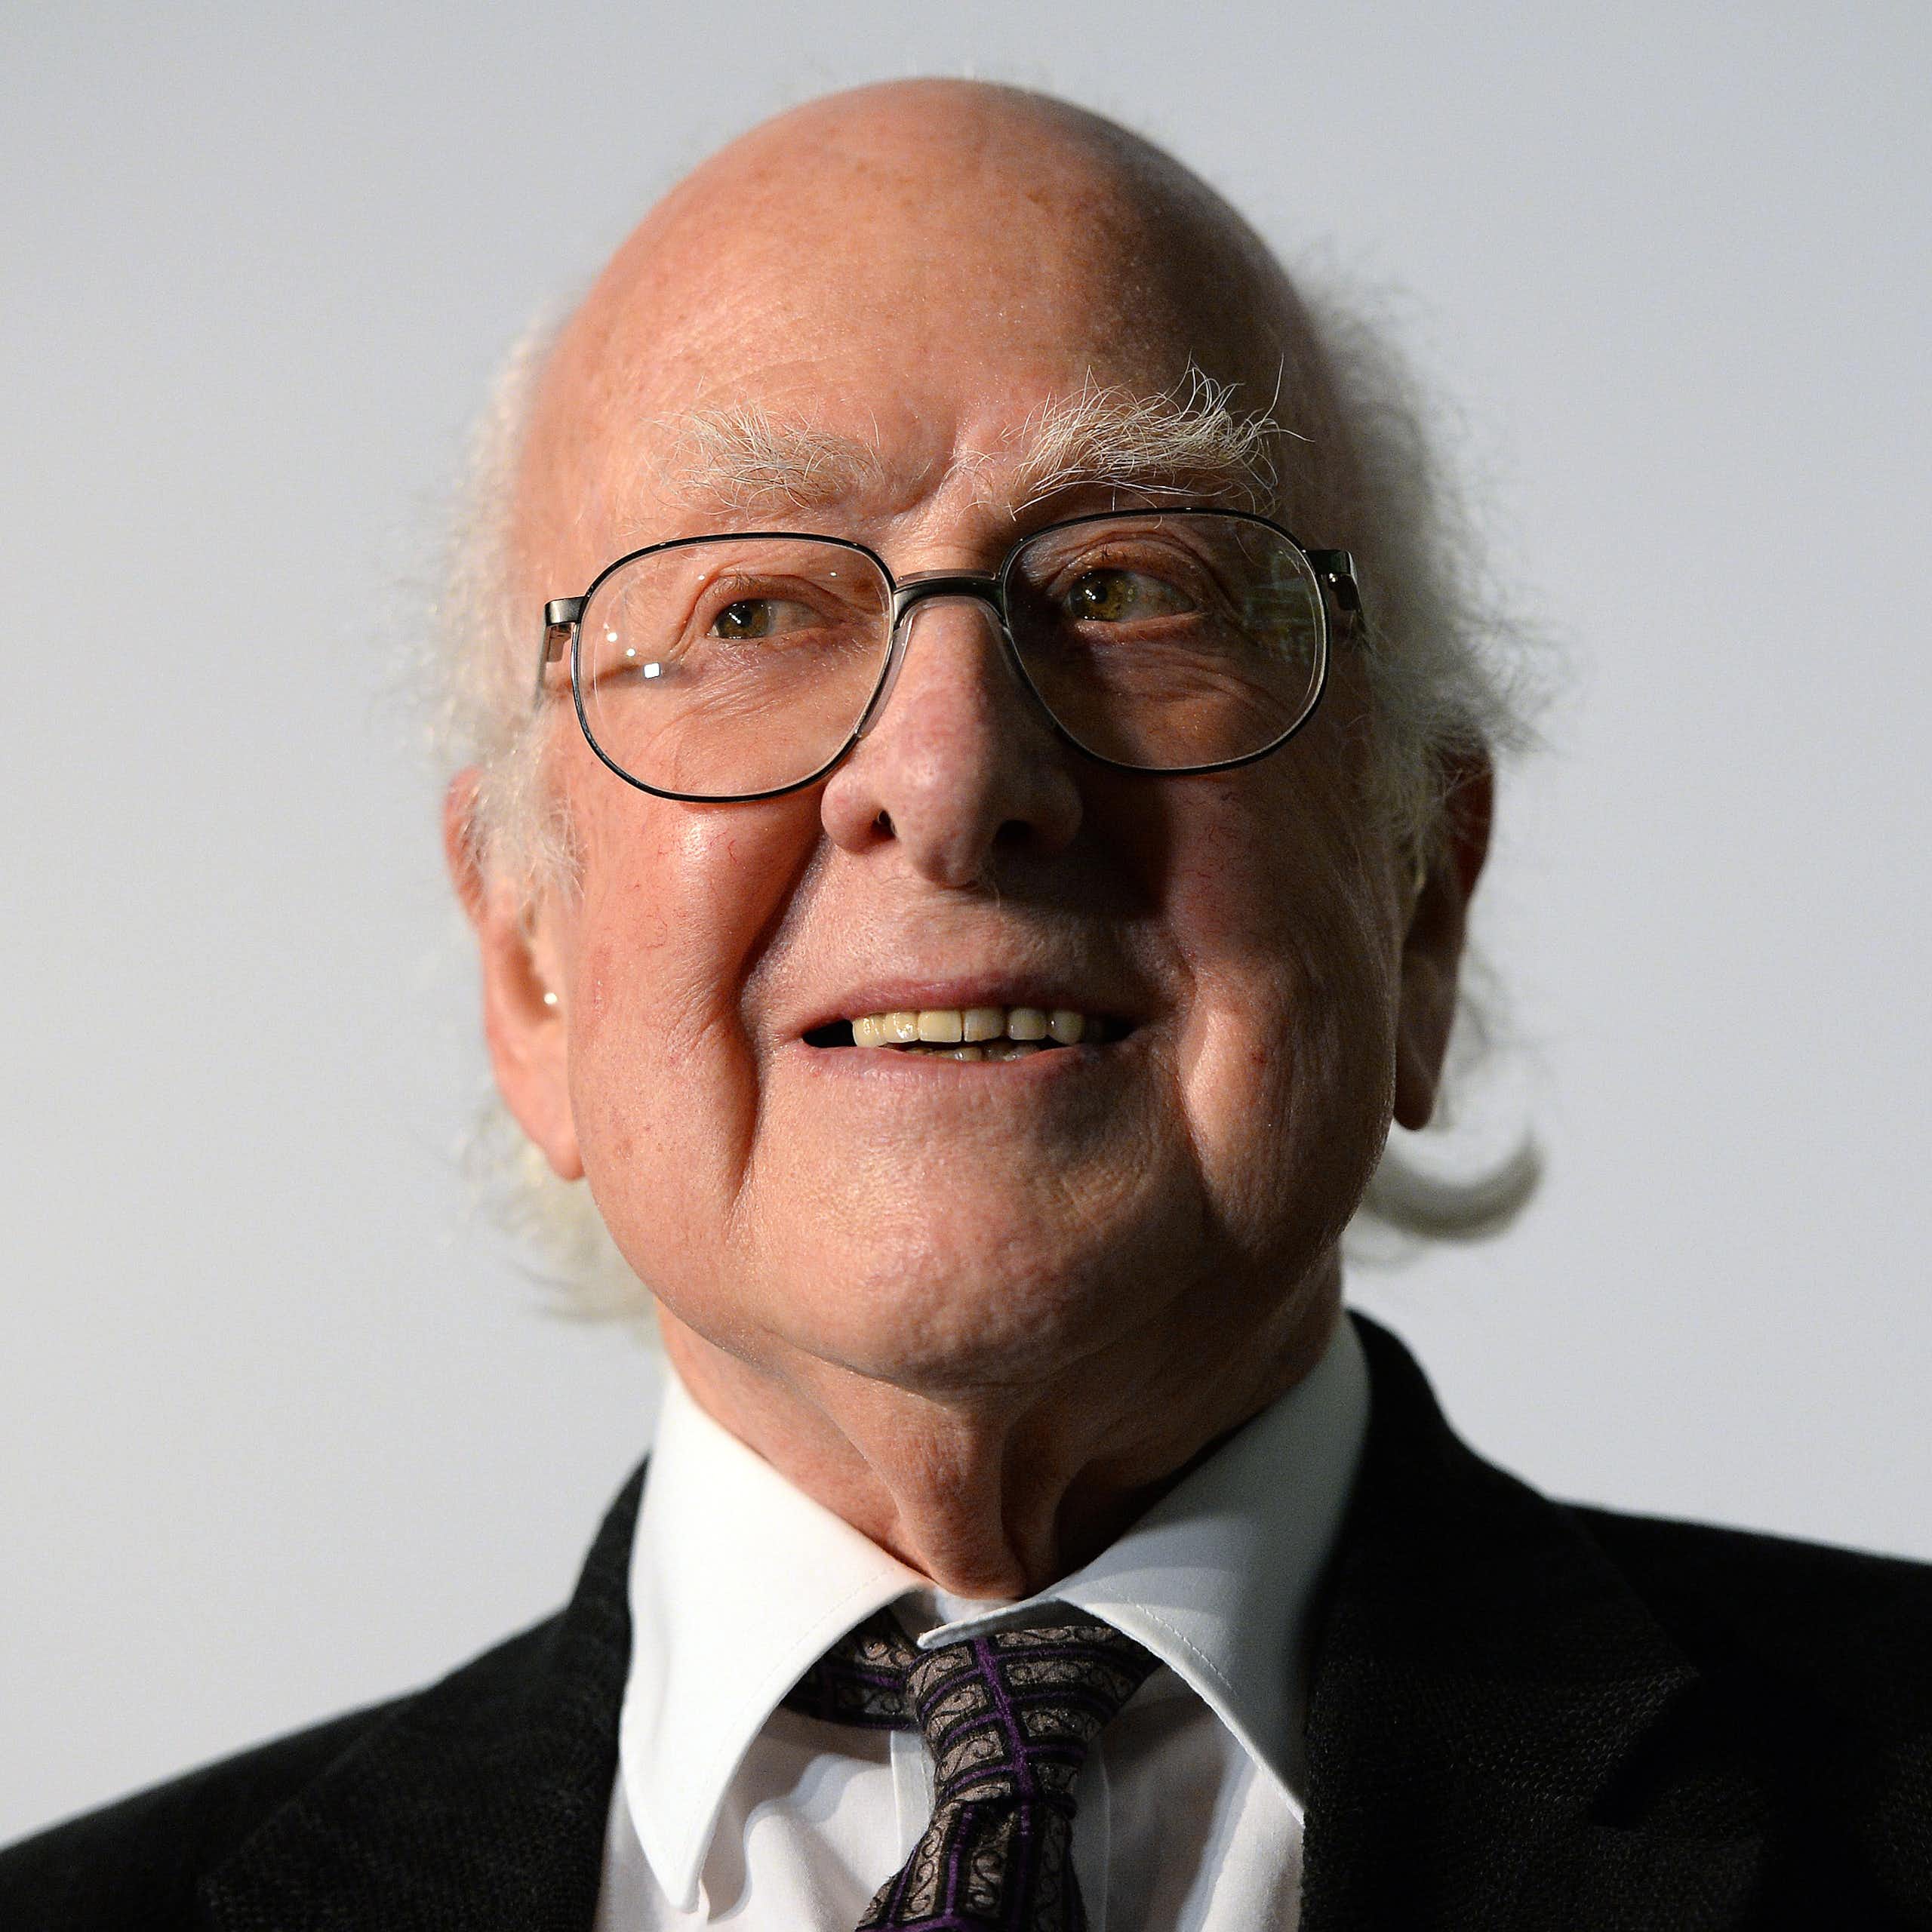 Head and shoulders portrait of grey-haired scientist, Peter Higgs